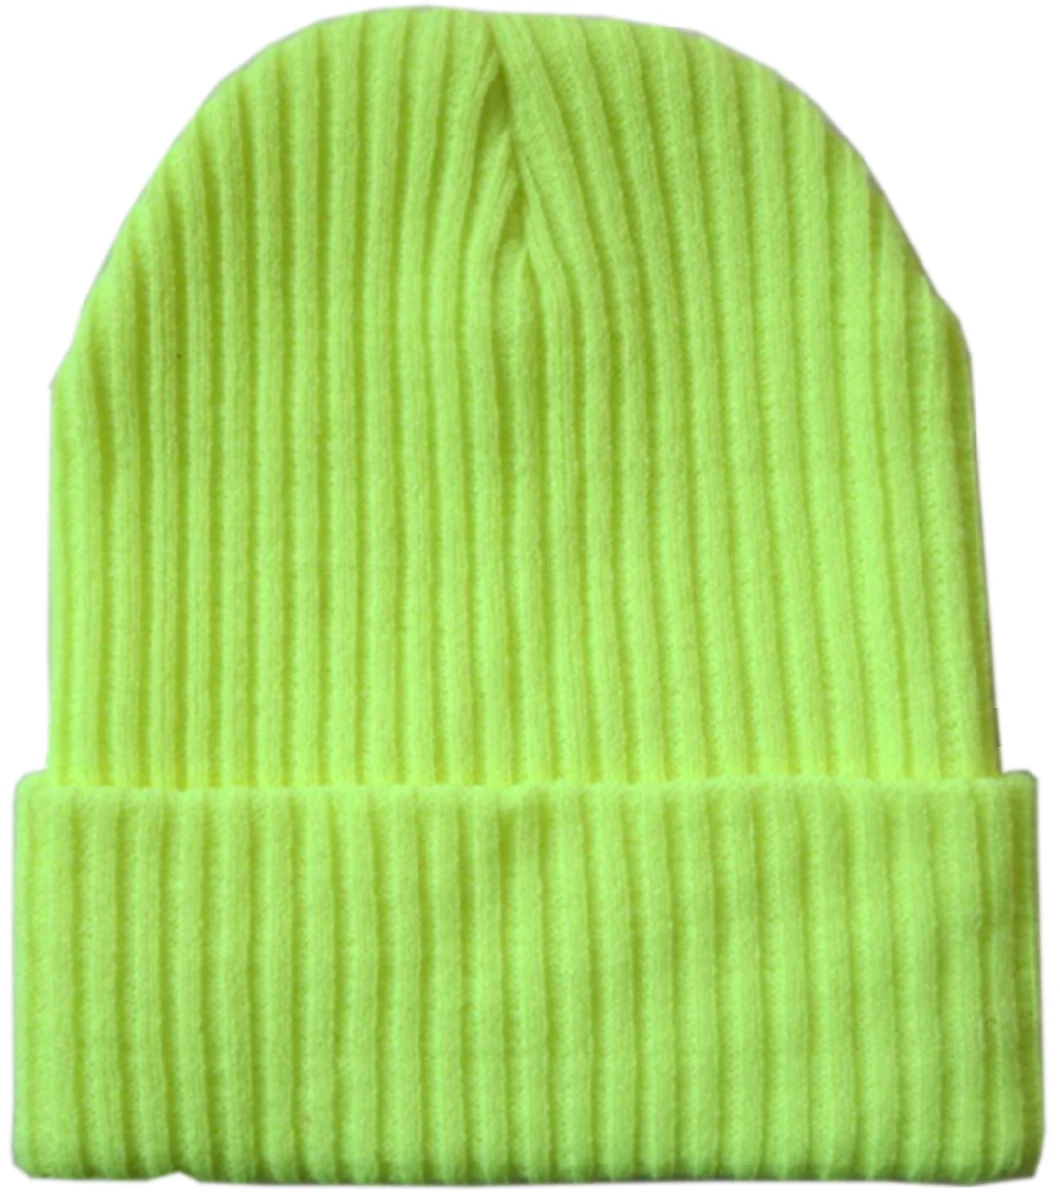 Warm Ski Wholesale Adult Soft Knitted Roll up Bottom Multi Neon Colors Winter Cuffed Beanie